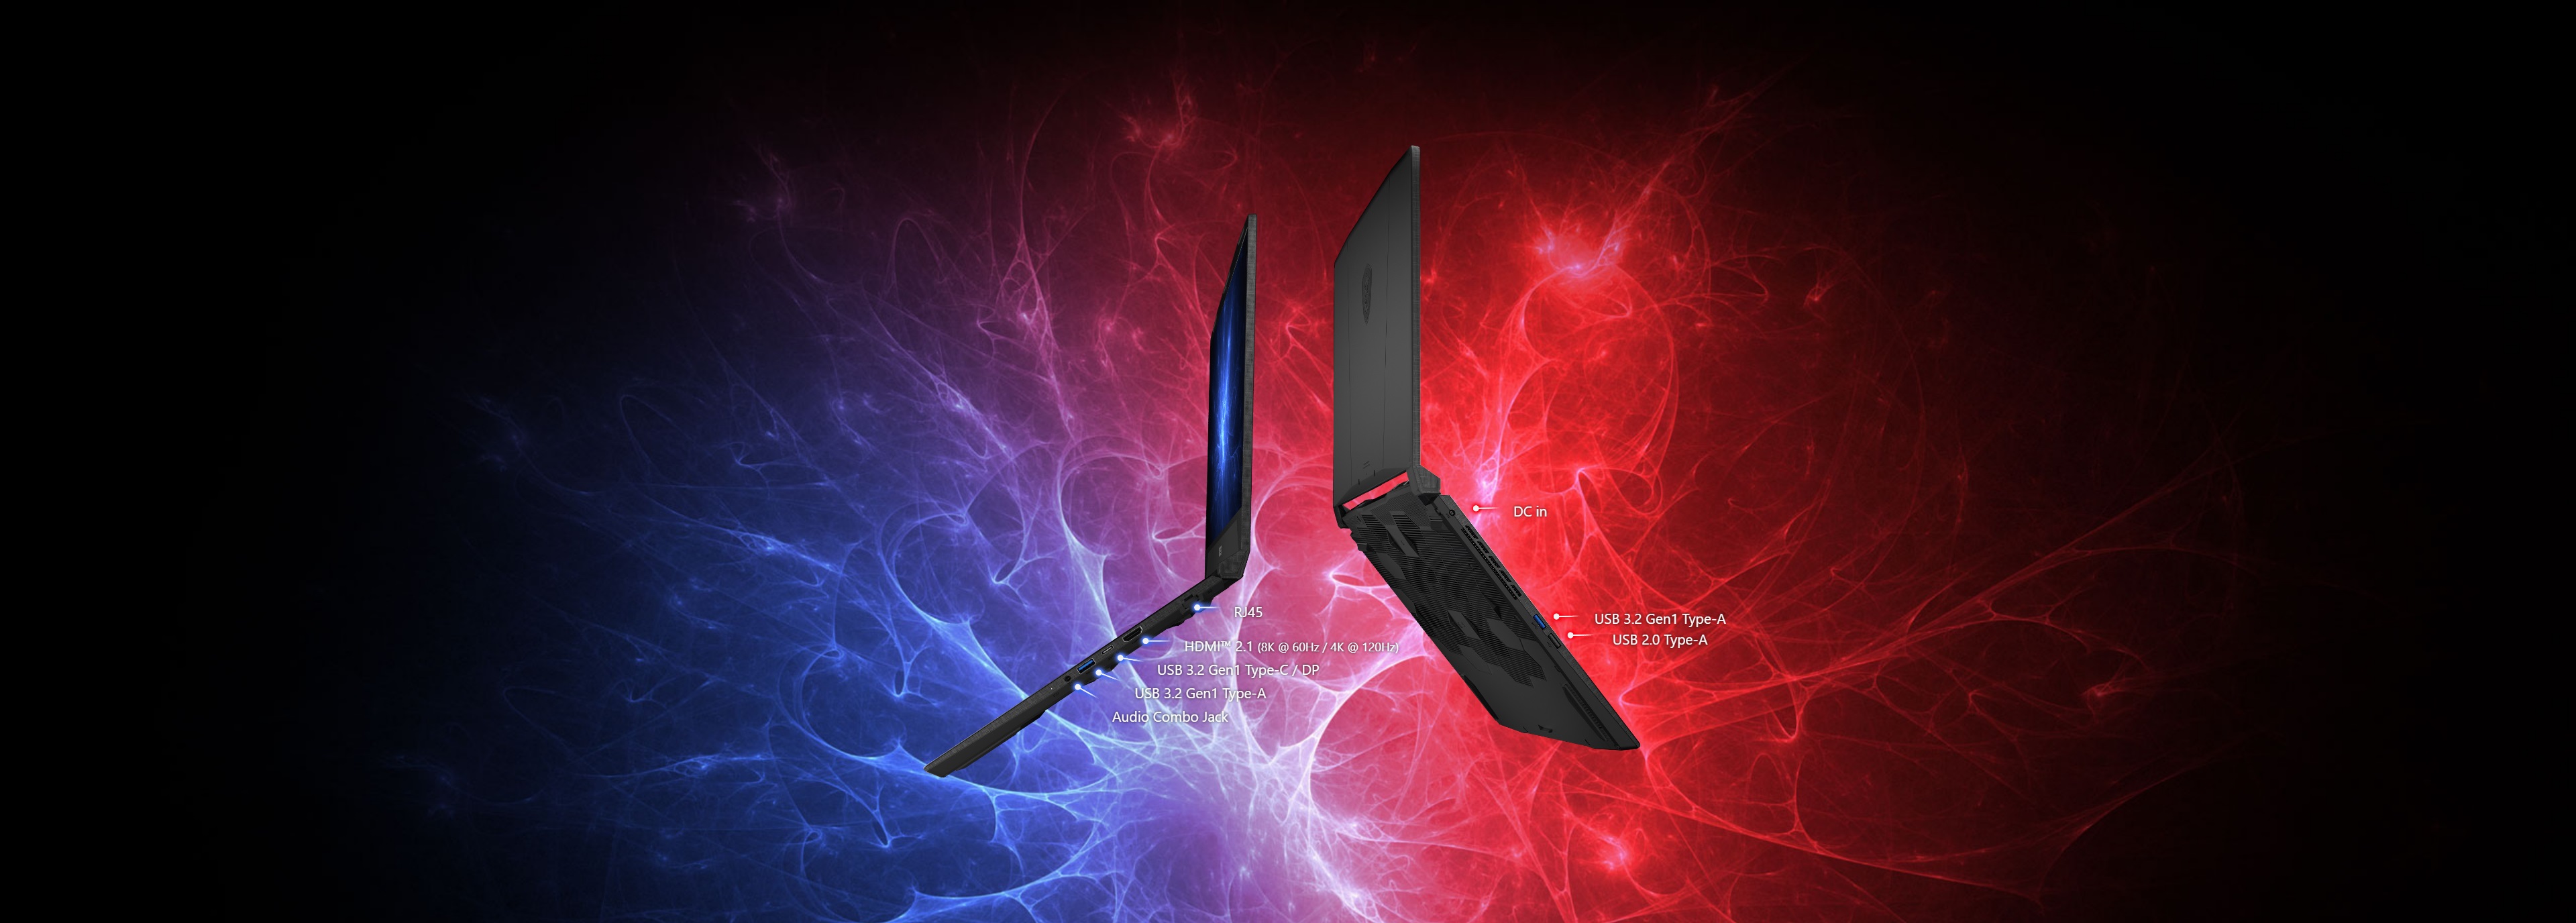 A large marketing image providing additional information about the product MSI Katana 15 (B13U) - 15.6" 144Hz, 13th Gen i5, RTX 3050, 16GB/512GB - Win 11 Pro Gaming Notebook - Additional alt info not provided